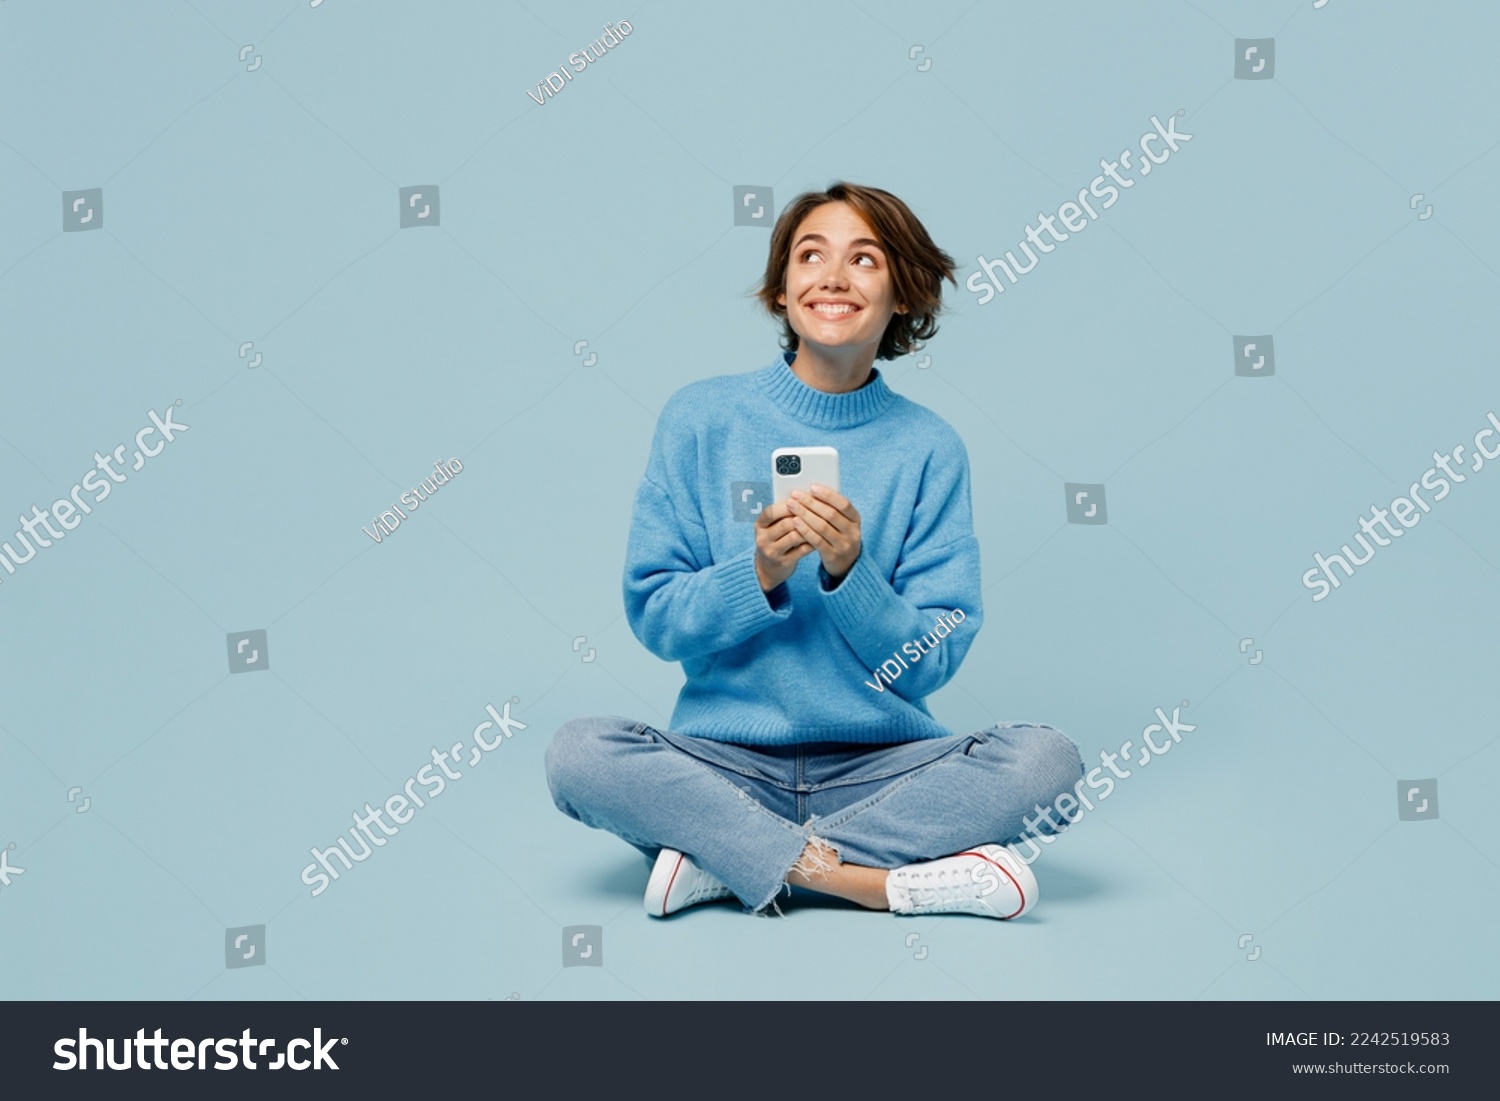 Full body fun young woman wear knitted sweater hold in hand use mobile cell phone look aside on workspace isolated on plain pastel light blue cyan background studio portrait. People lifestyle concept #2242519583